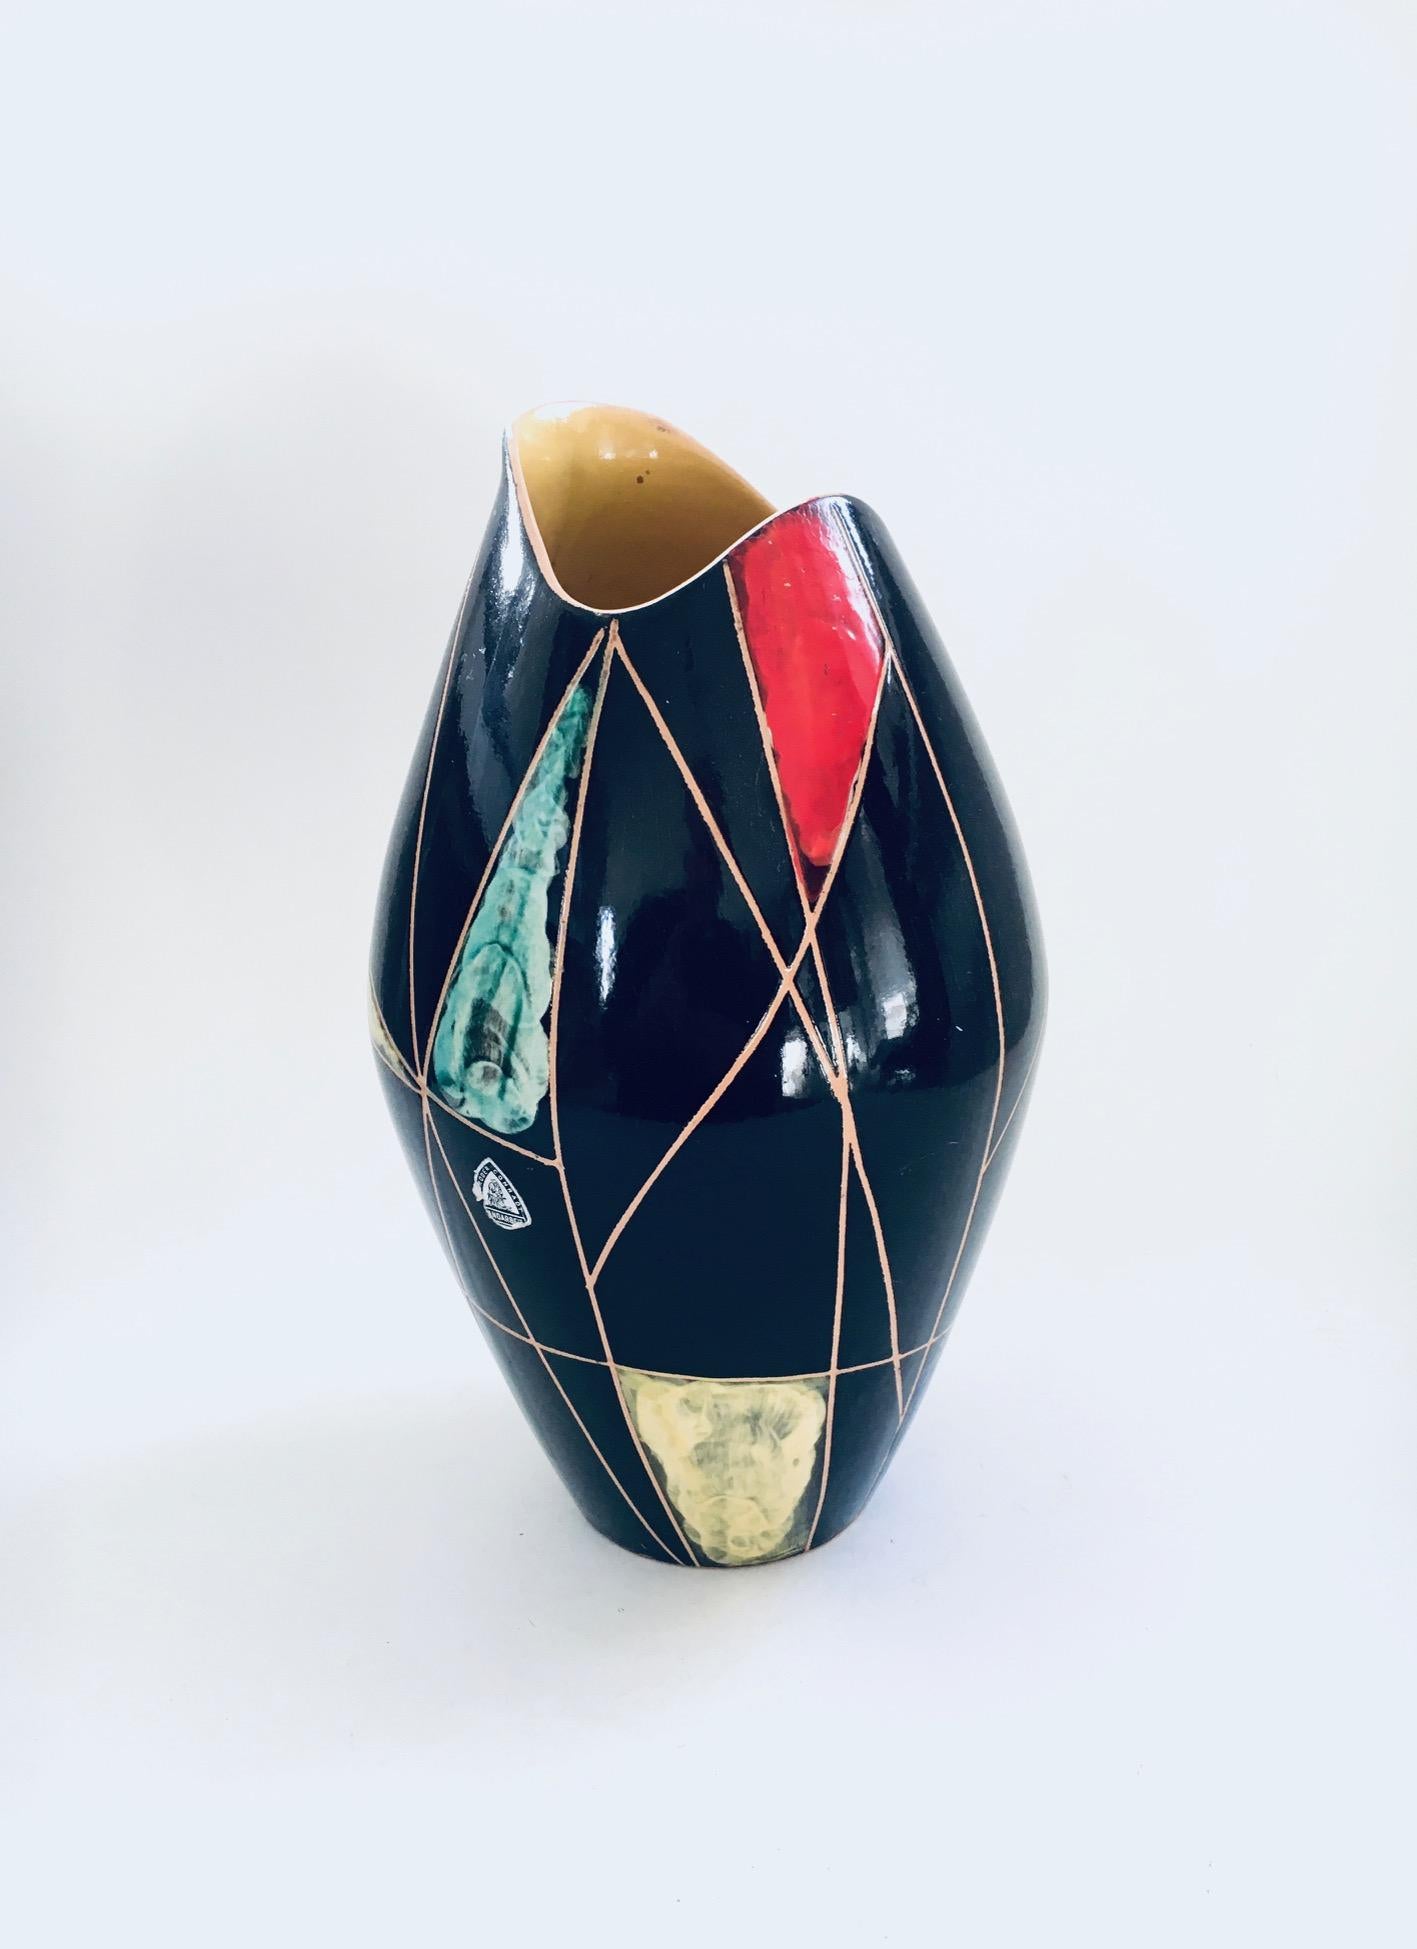 Mid-Century Modern Art Ceramic Vase KRETA 41815 by Brothers Conradt, West Germany 1960's For Sale